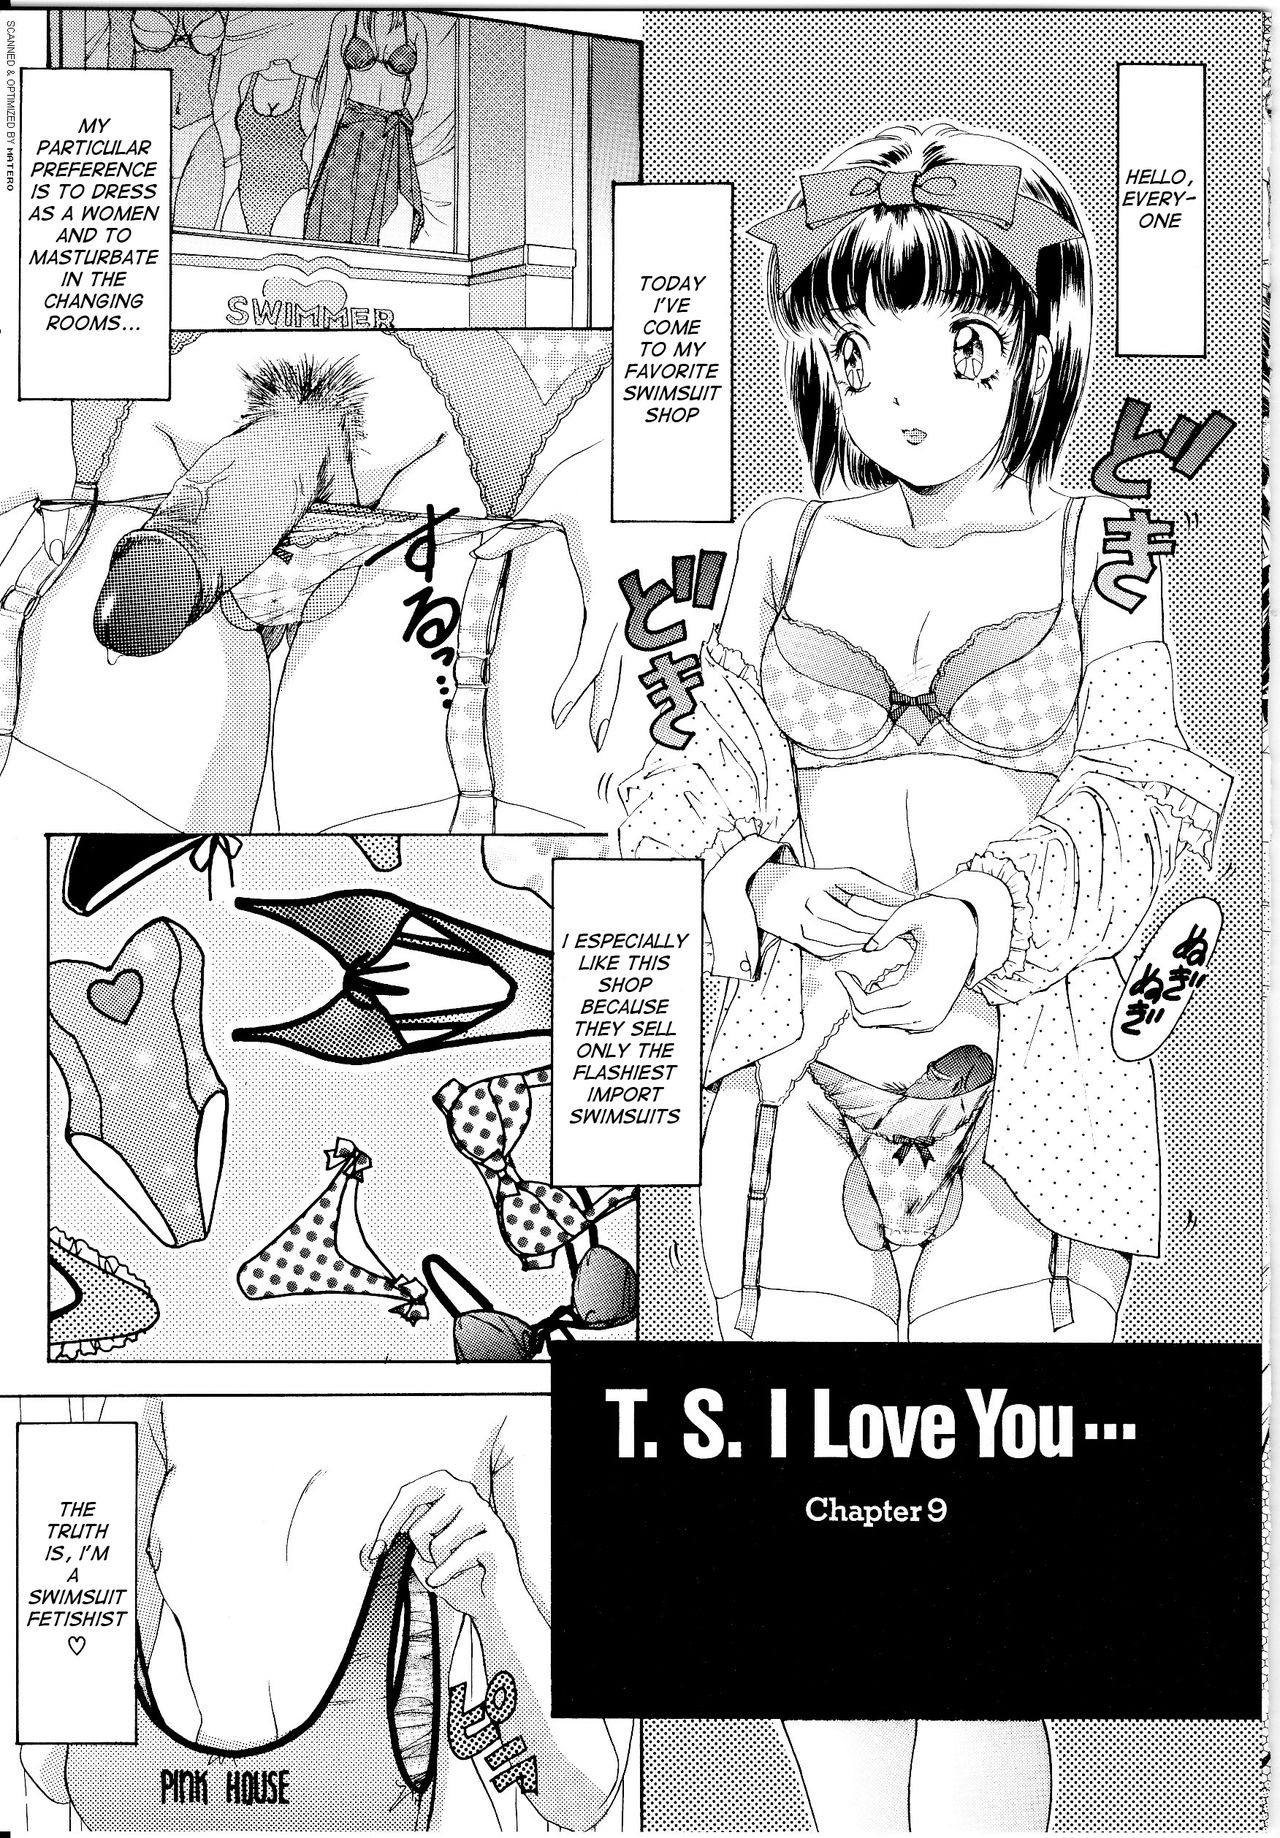 [The Amanoja9] T.S. I LOVE YOU... 1 Ch. 9 [English] [The Amanoja9] T.S. I LOVE YOU… 第9話 [英訳]